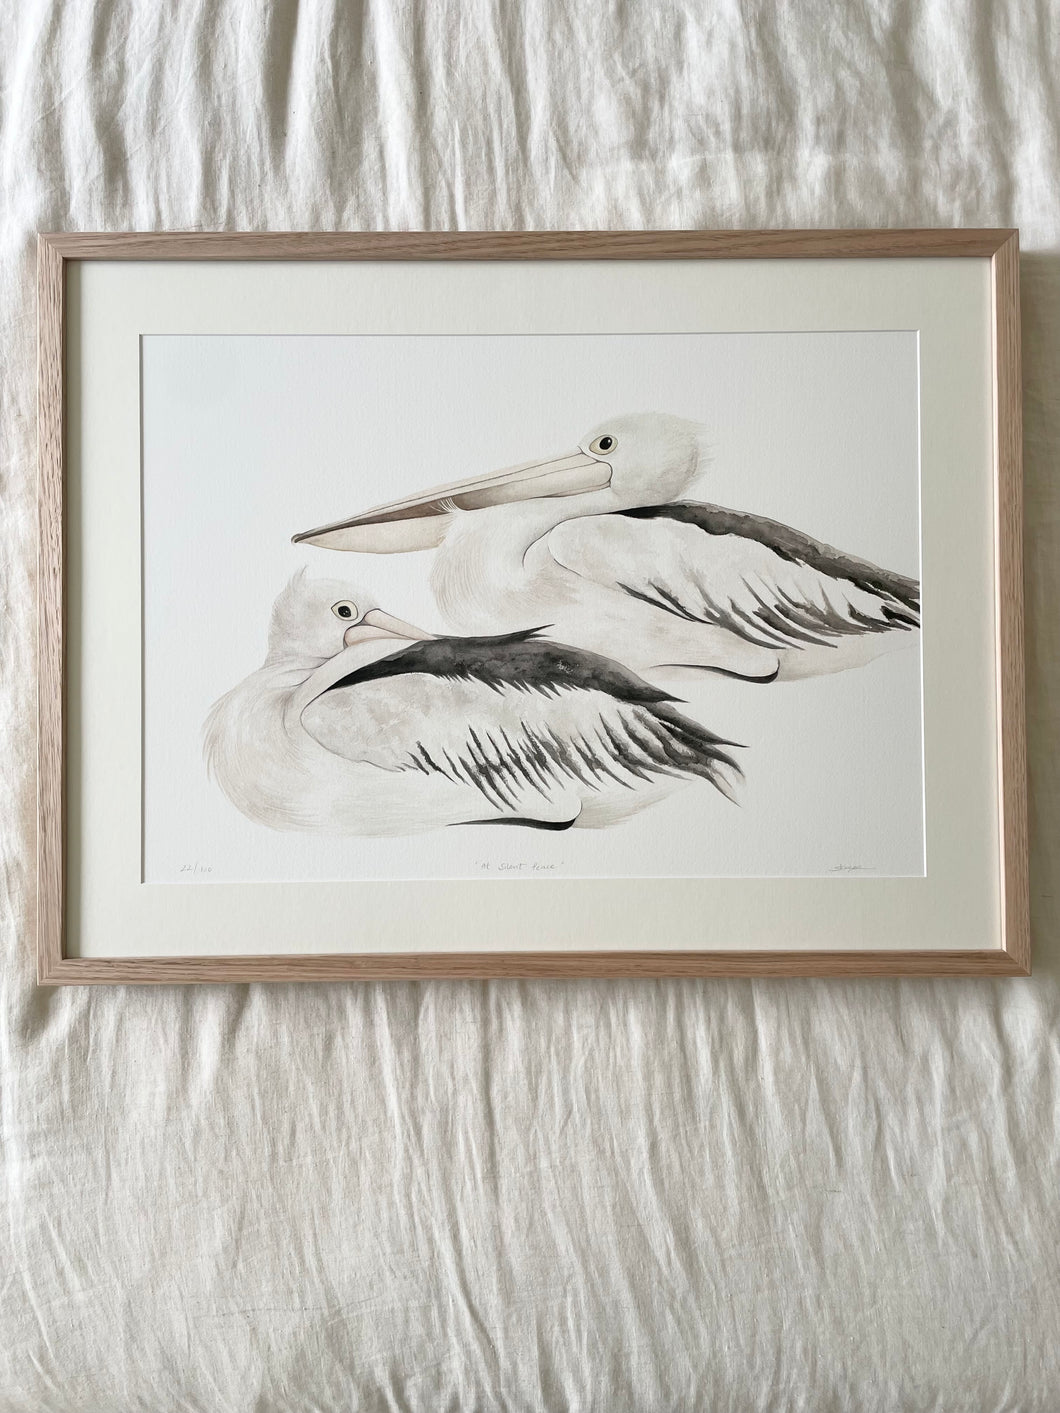 At Silent Peace | Framed Limited Edition